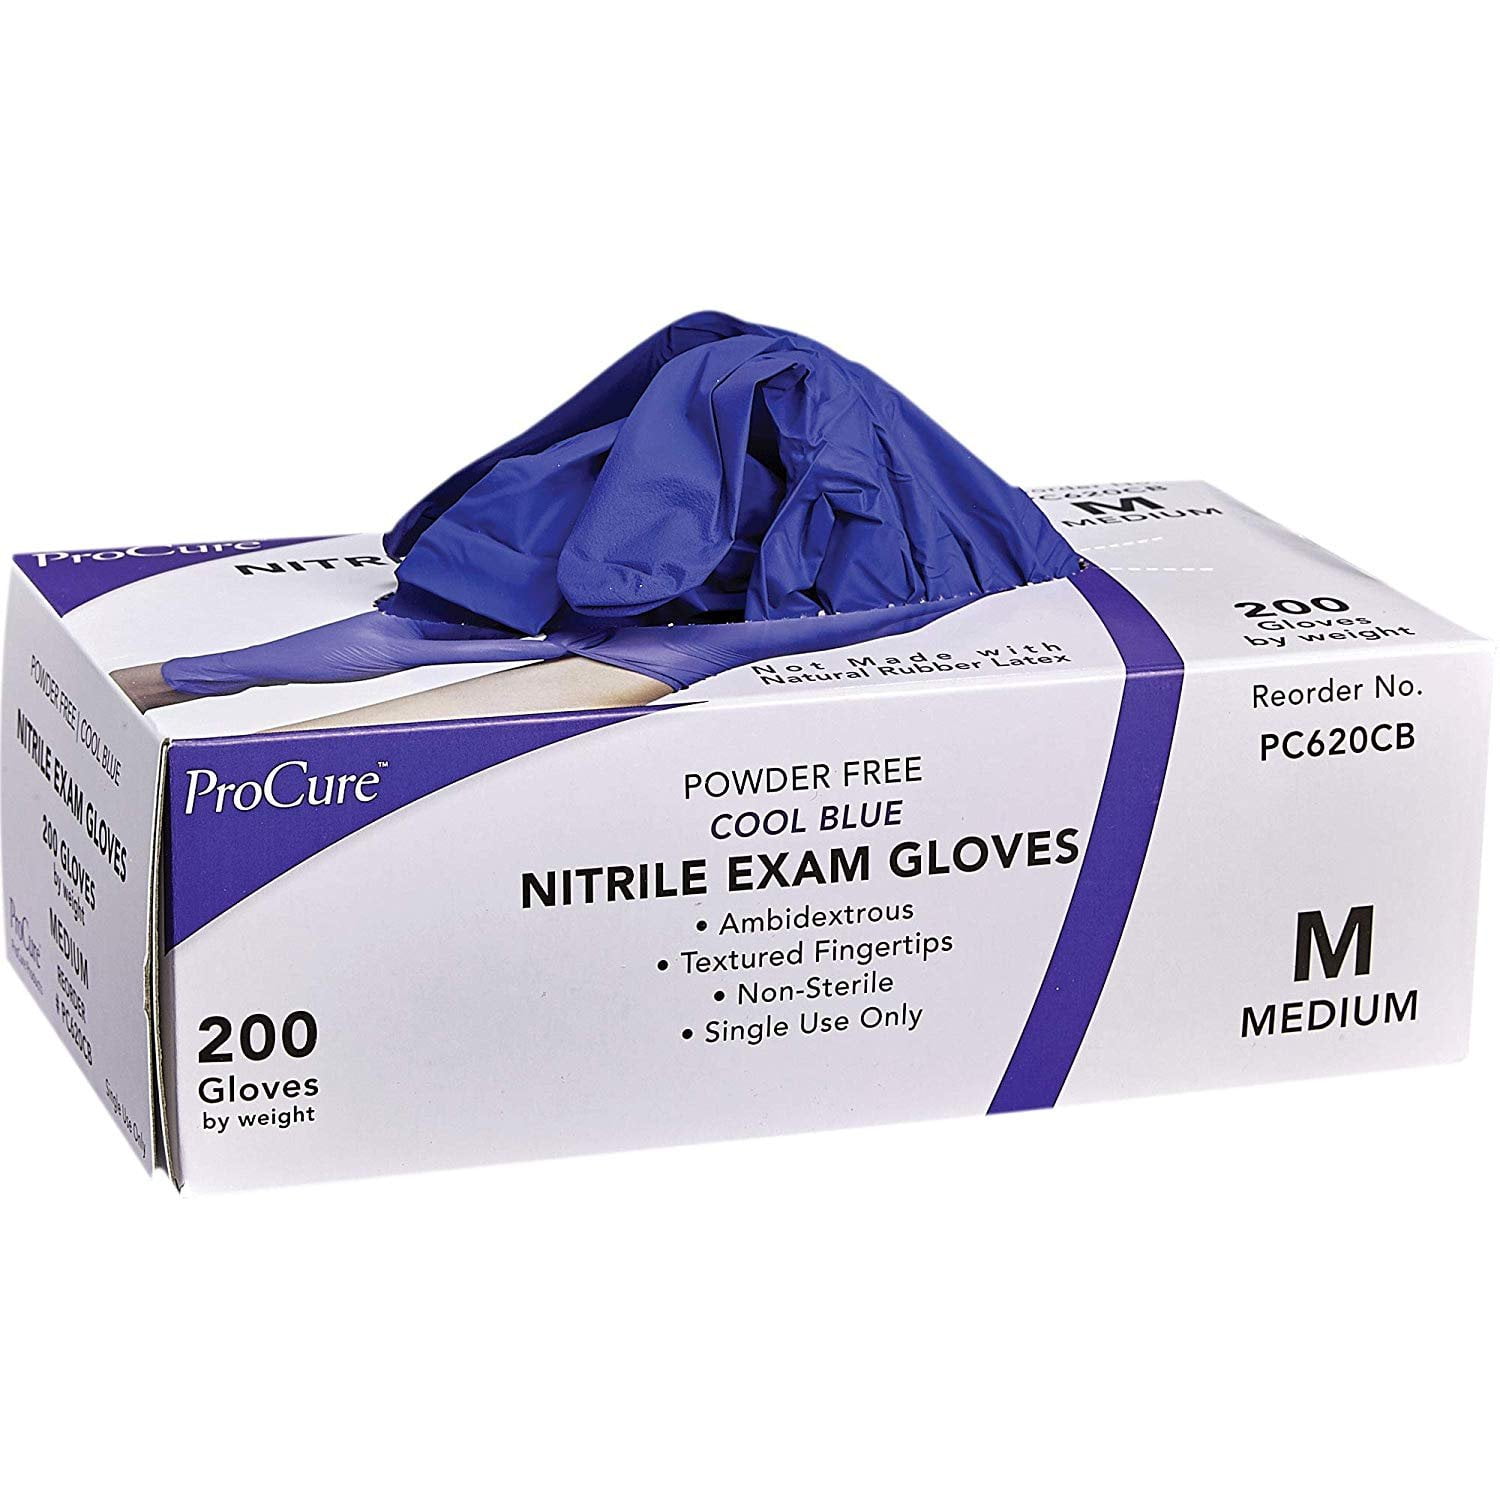 Nitrile Exam Gloves; Non-Latex; Powered-Free; M-purpose; SIZE M; 200 Gloves–NEW. 